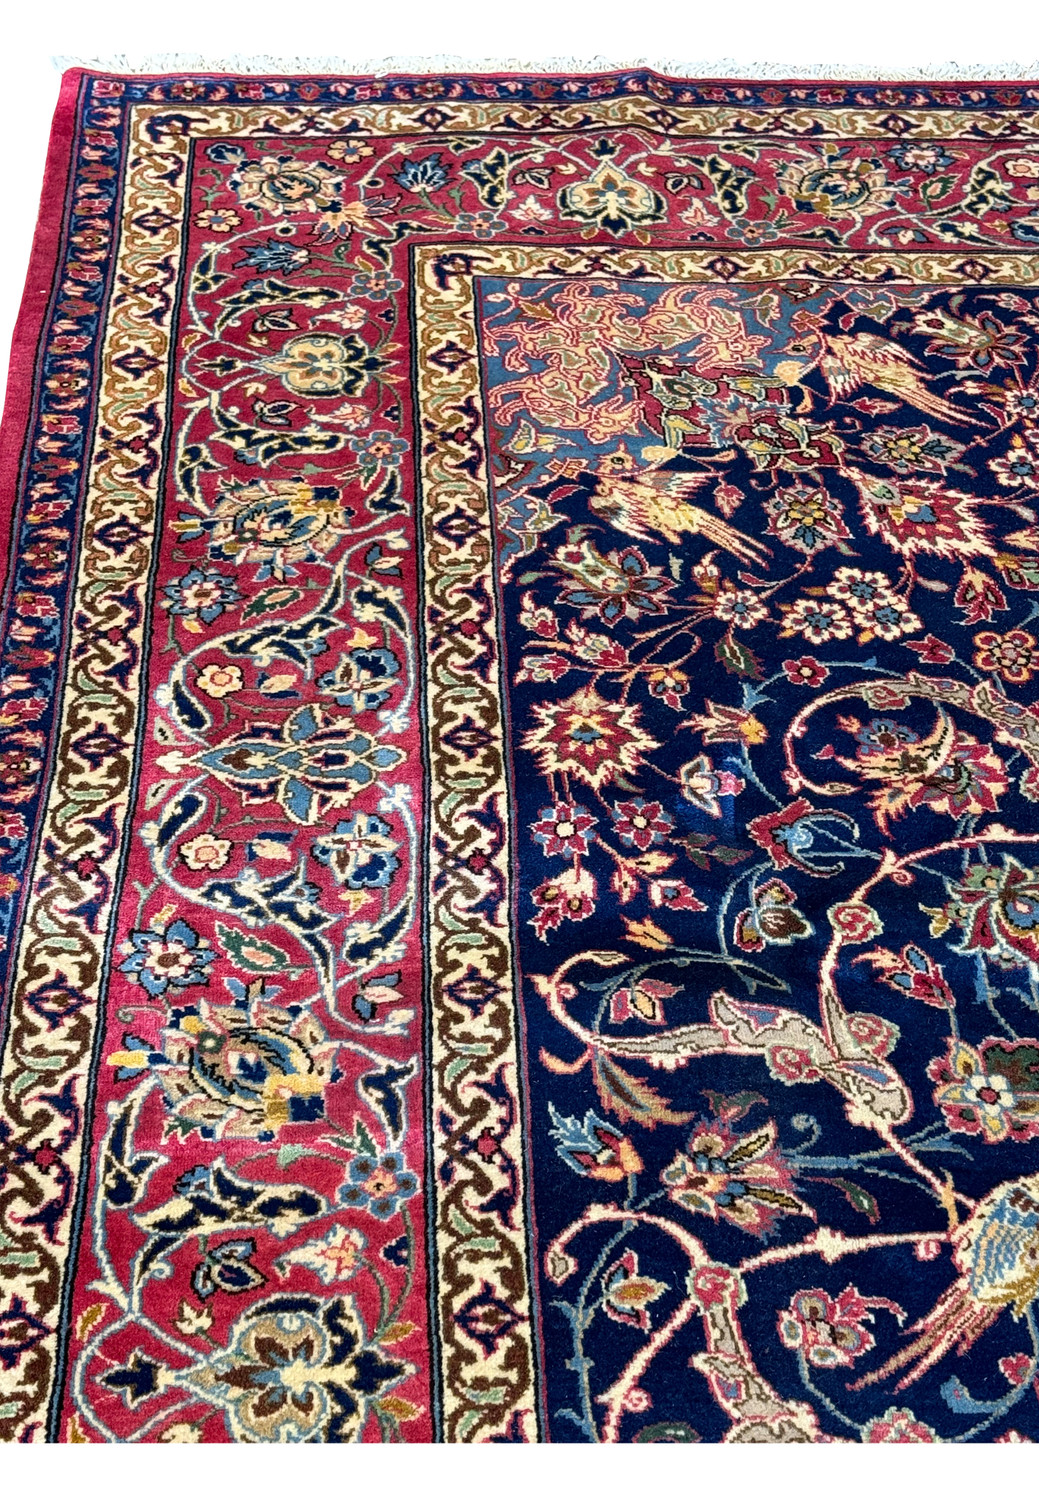 Detailed view of a Persian Isfahan rug featuring animal and floral patterns in vibrant colors against a navy background.